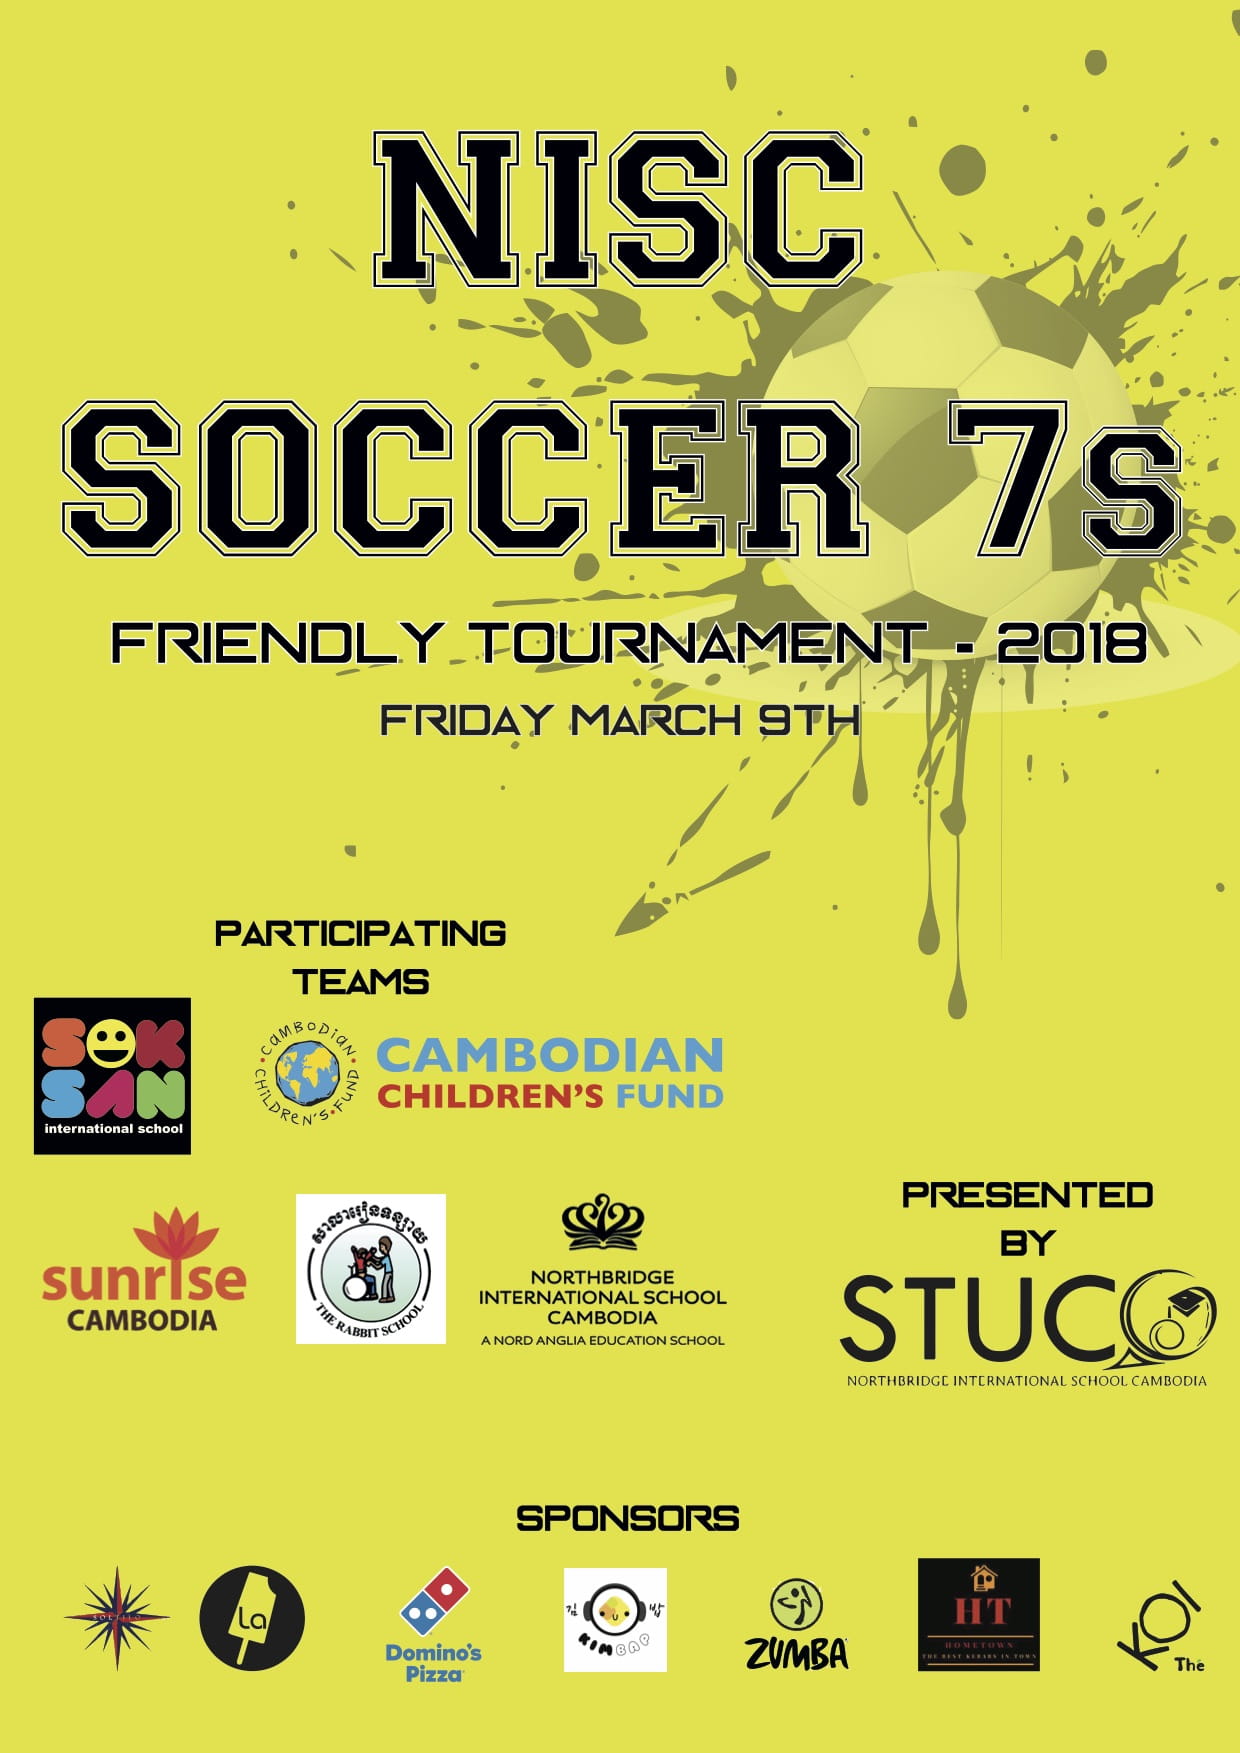 All welcome to the NISC Soccer 7s on 9 March-all-welcome-to-the-nisc-soccer-7s-on-9-march-soccer poster